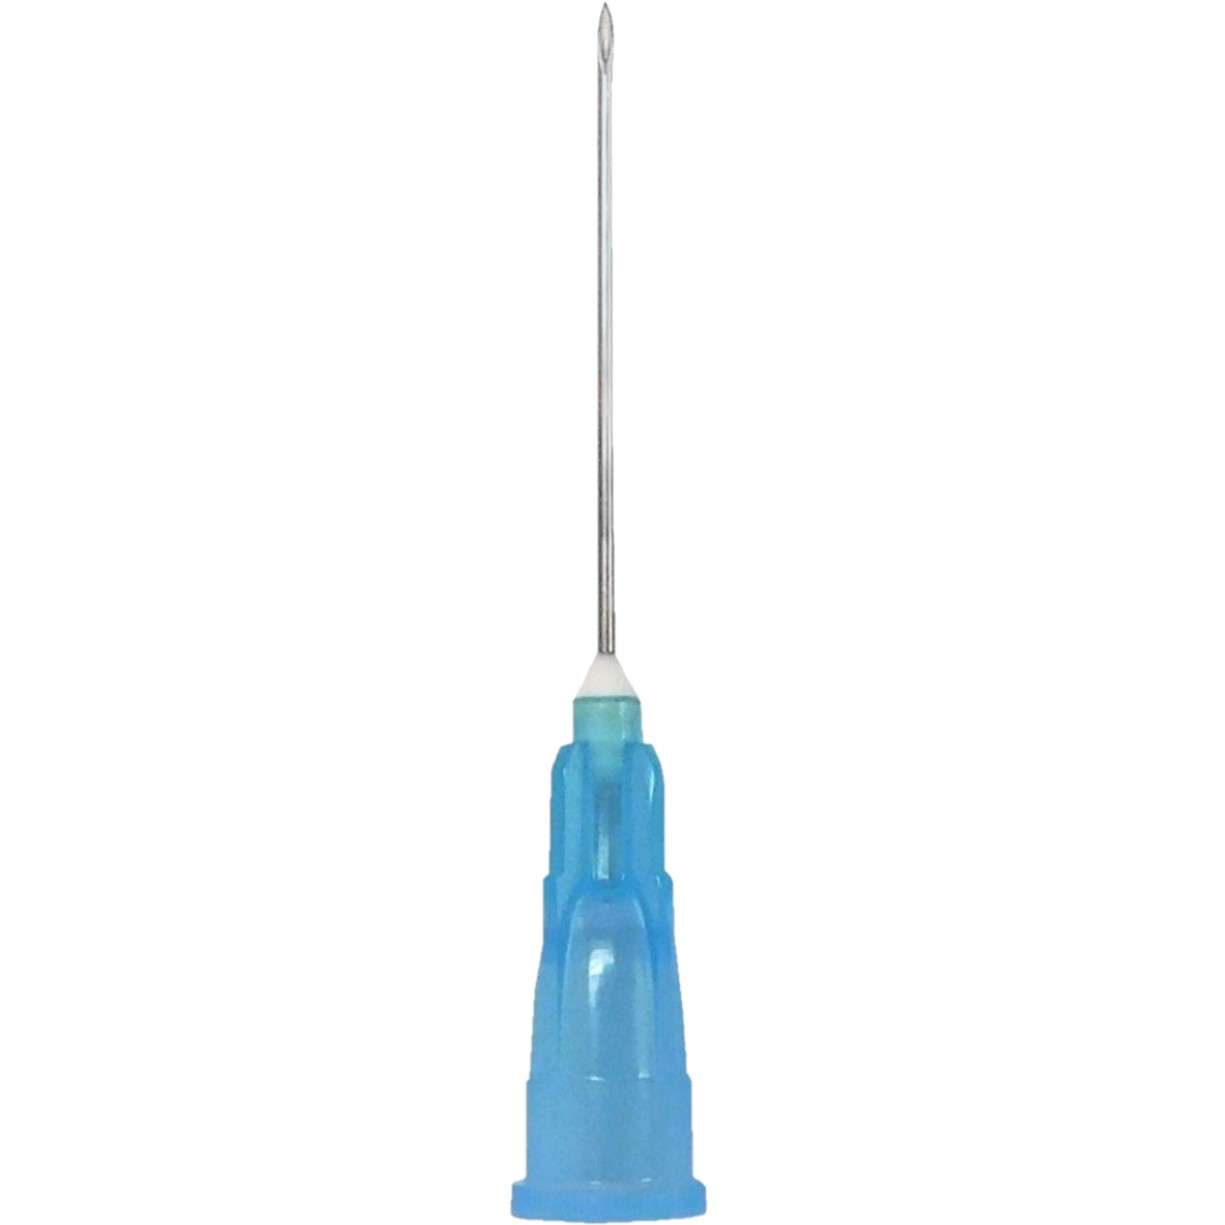 Needle Hypodermic Without Safety 23 Gauge 1 Inch .. .  .  